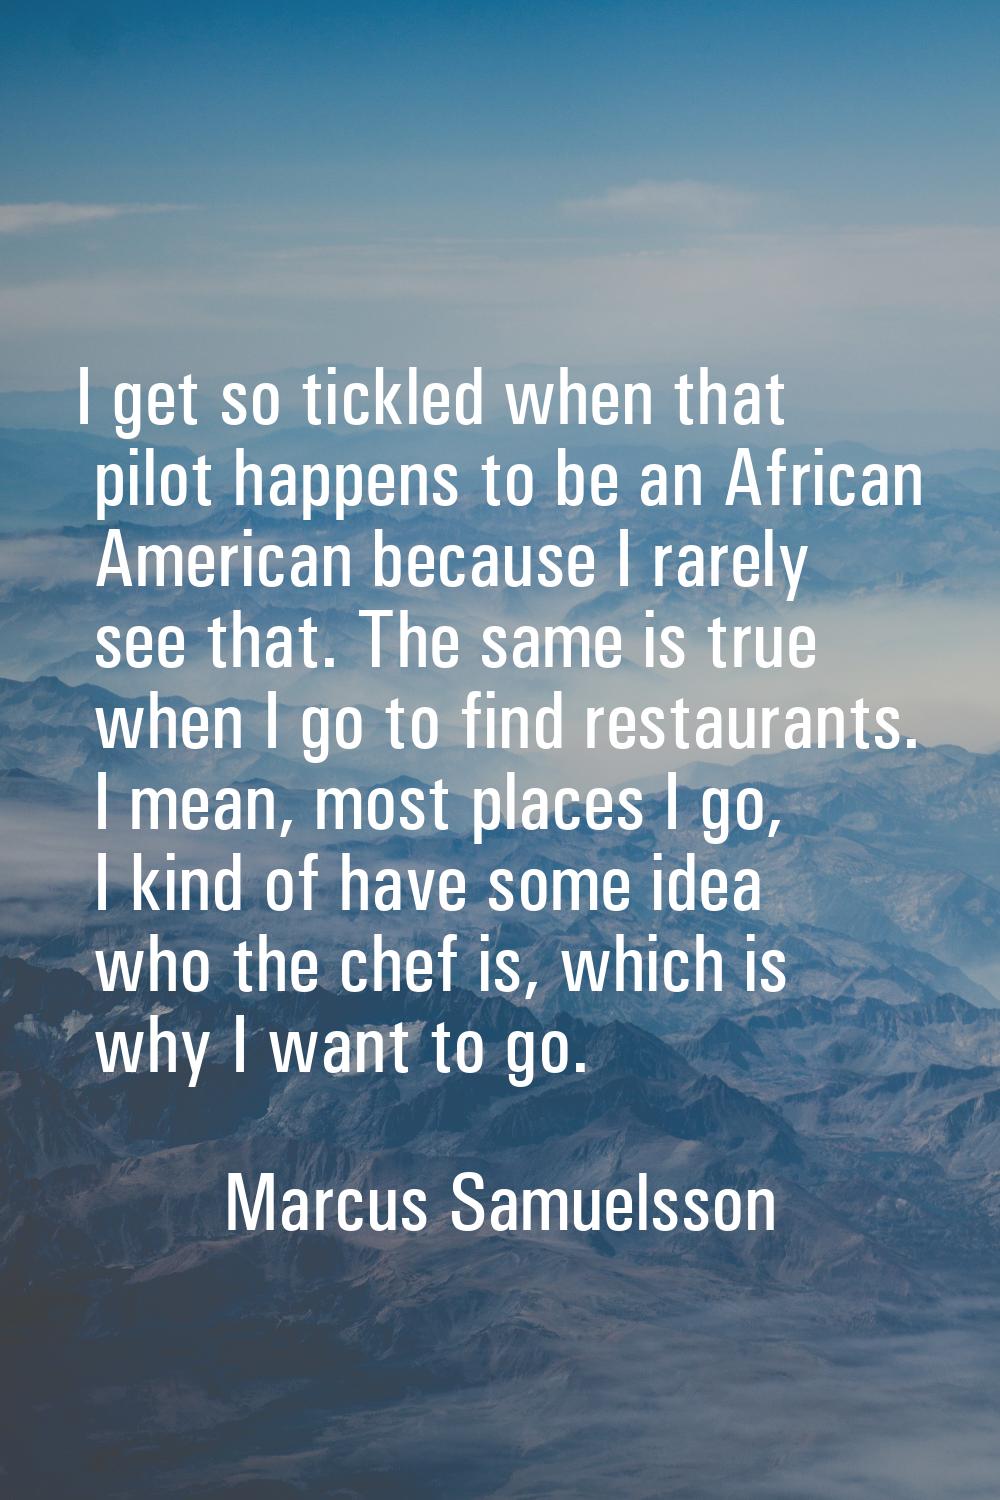 I get so tickled when that pilot happens to be an African American because I rarely see that. The s